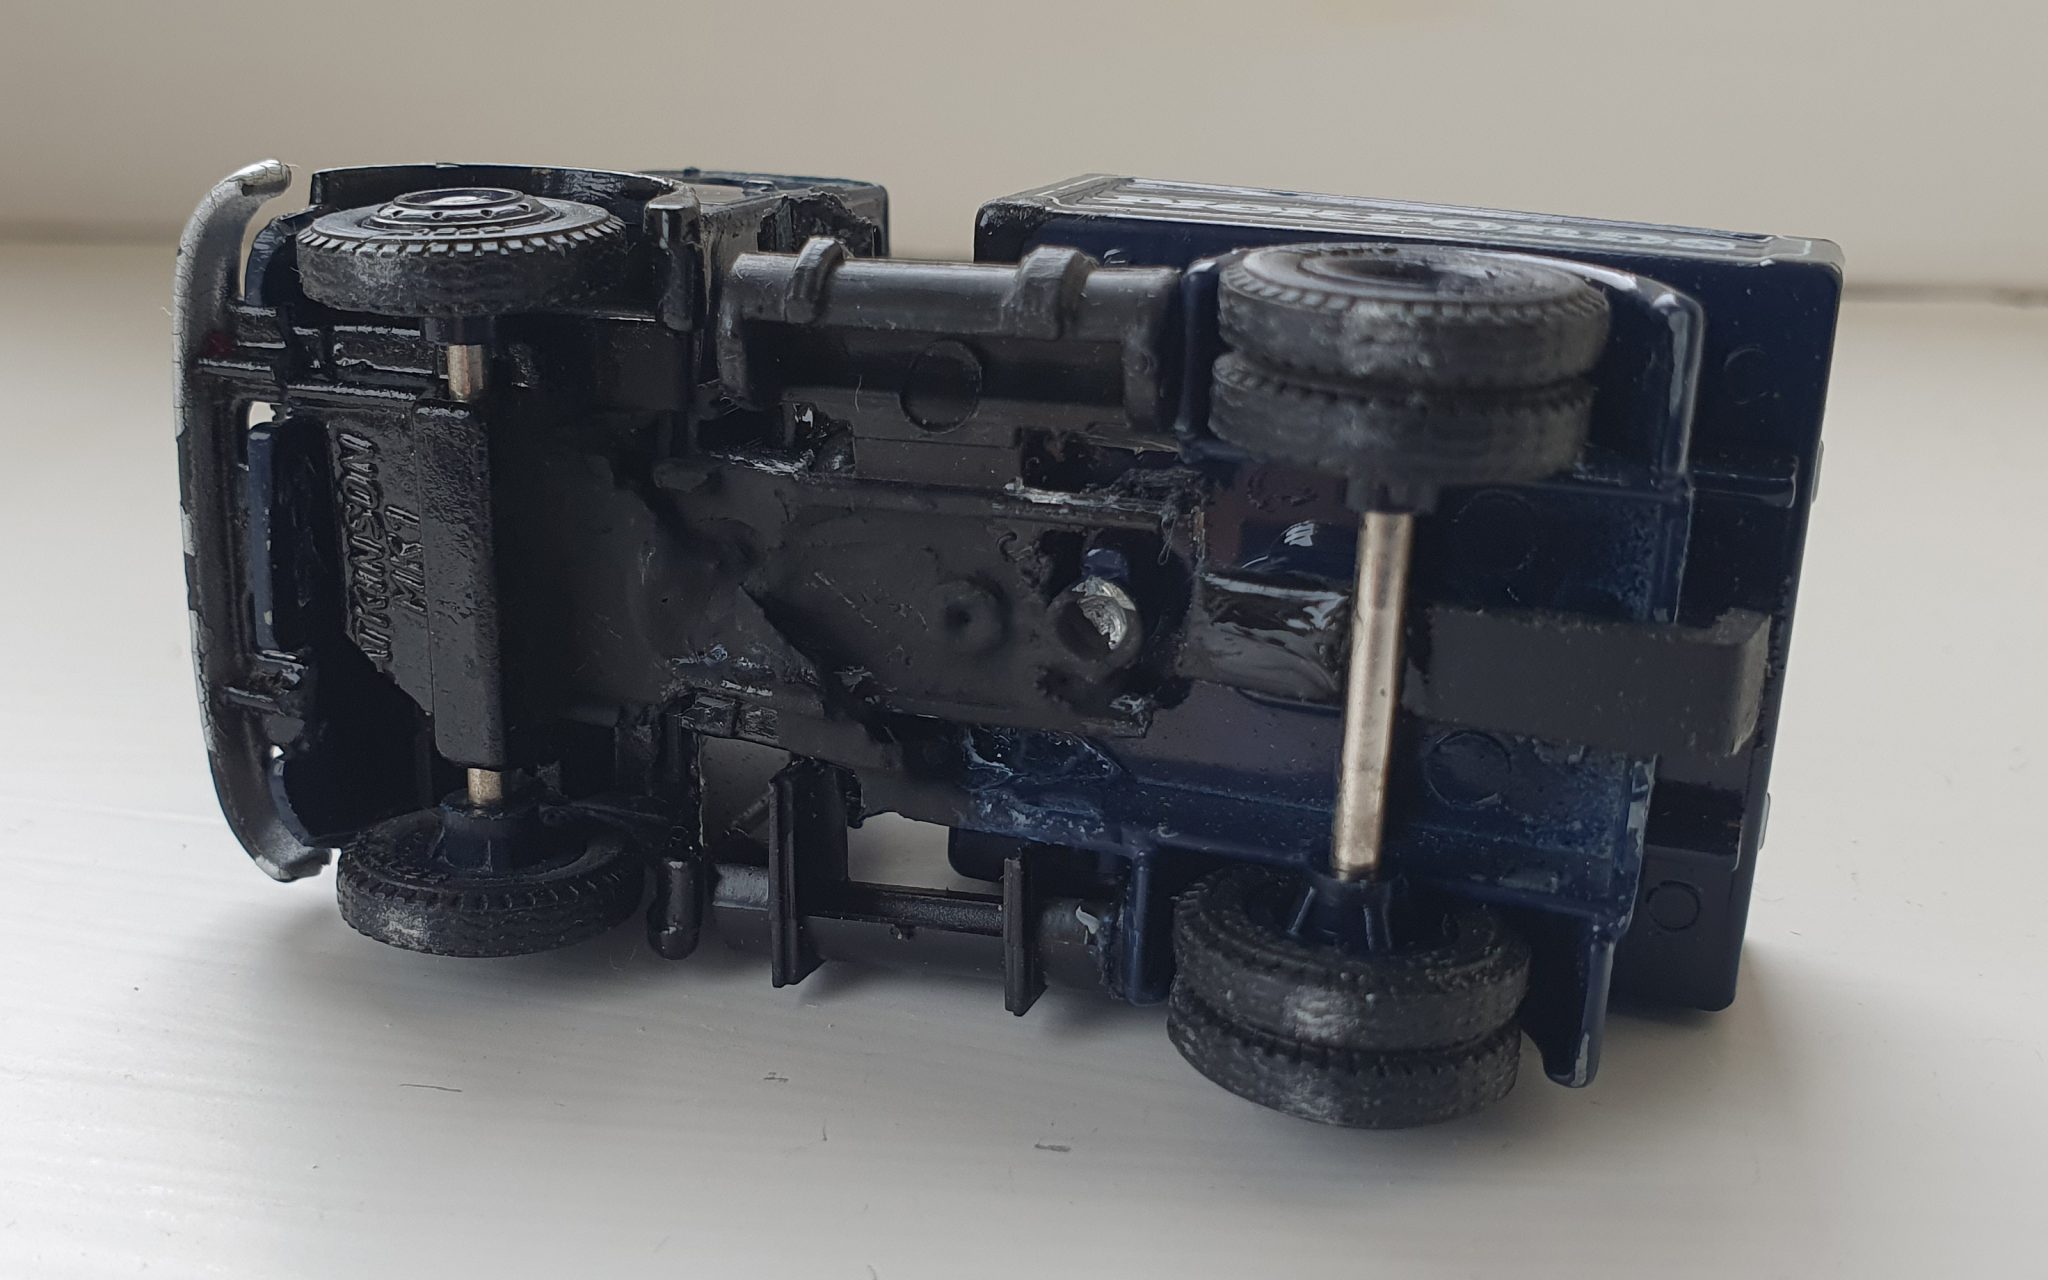 Underside view showing modified chassis and mazak rot damage and repair. 